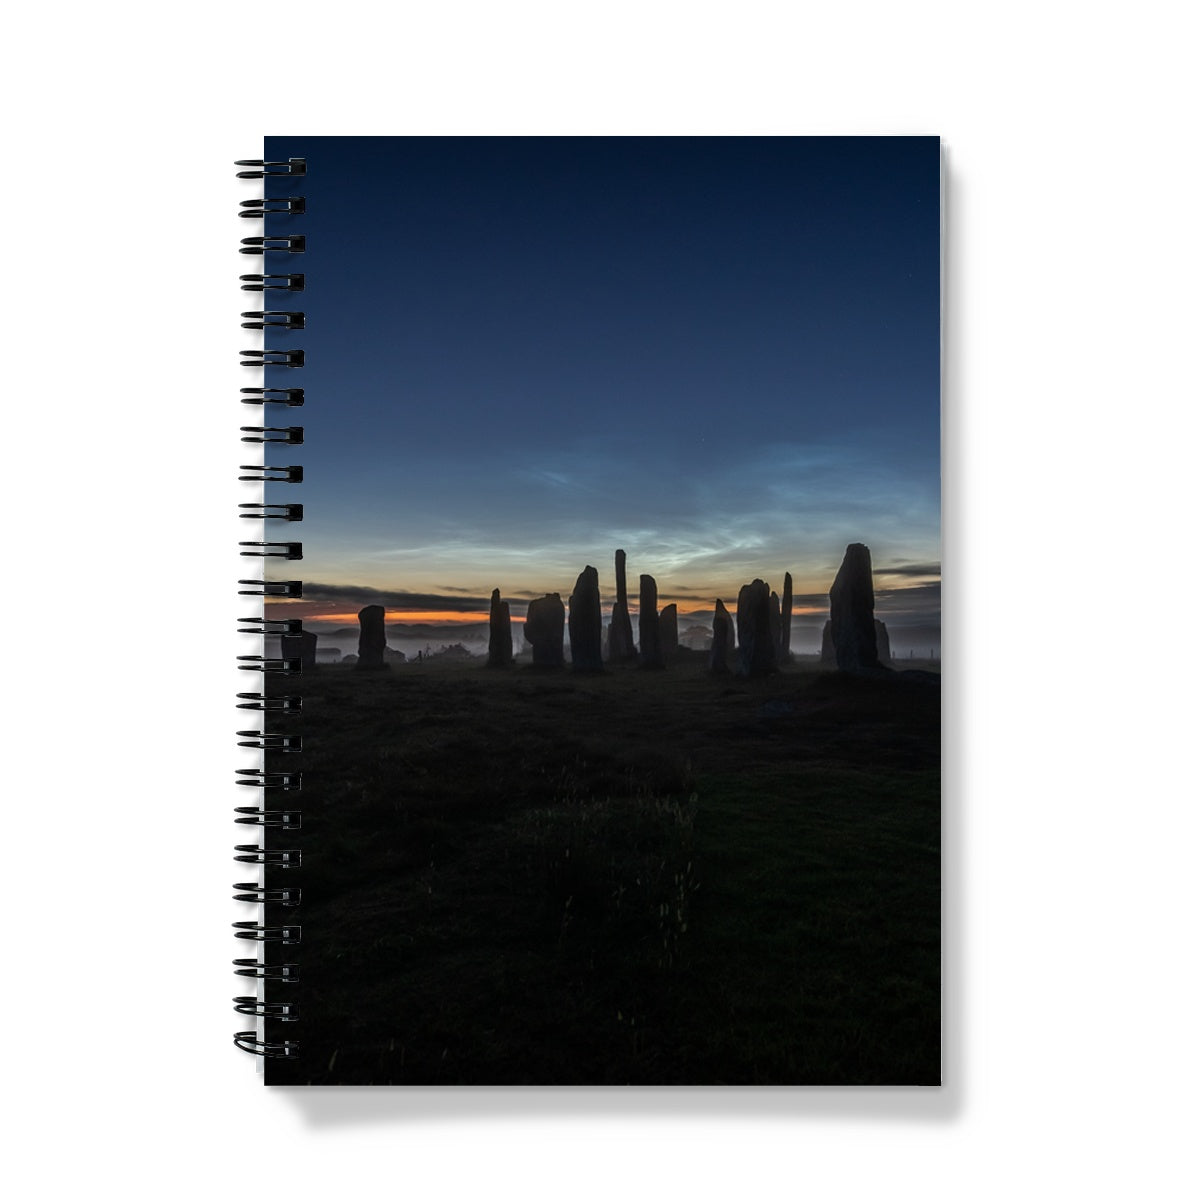 Callanish Stones and Noctilucent Clouds Notebook